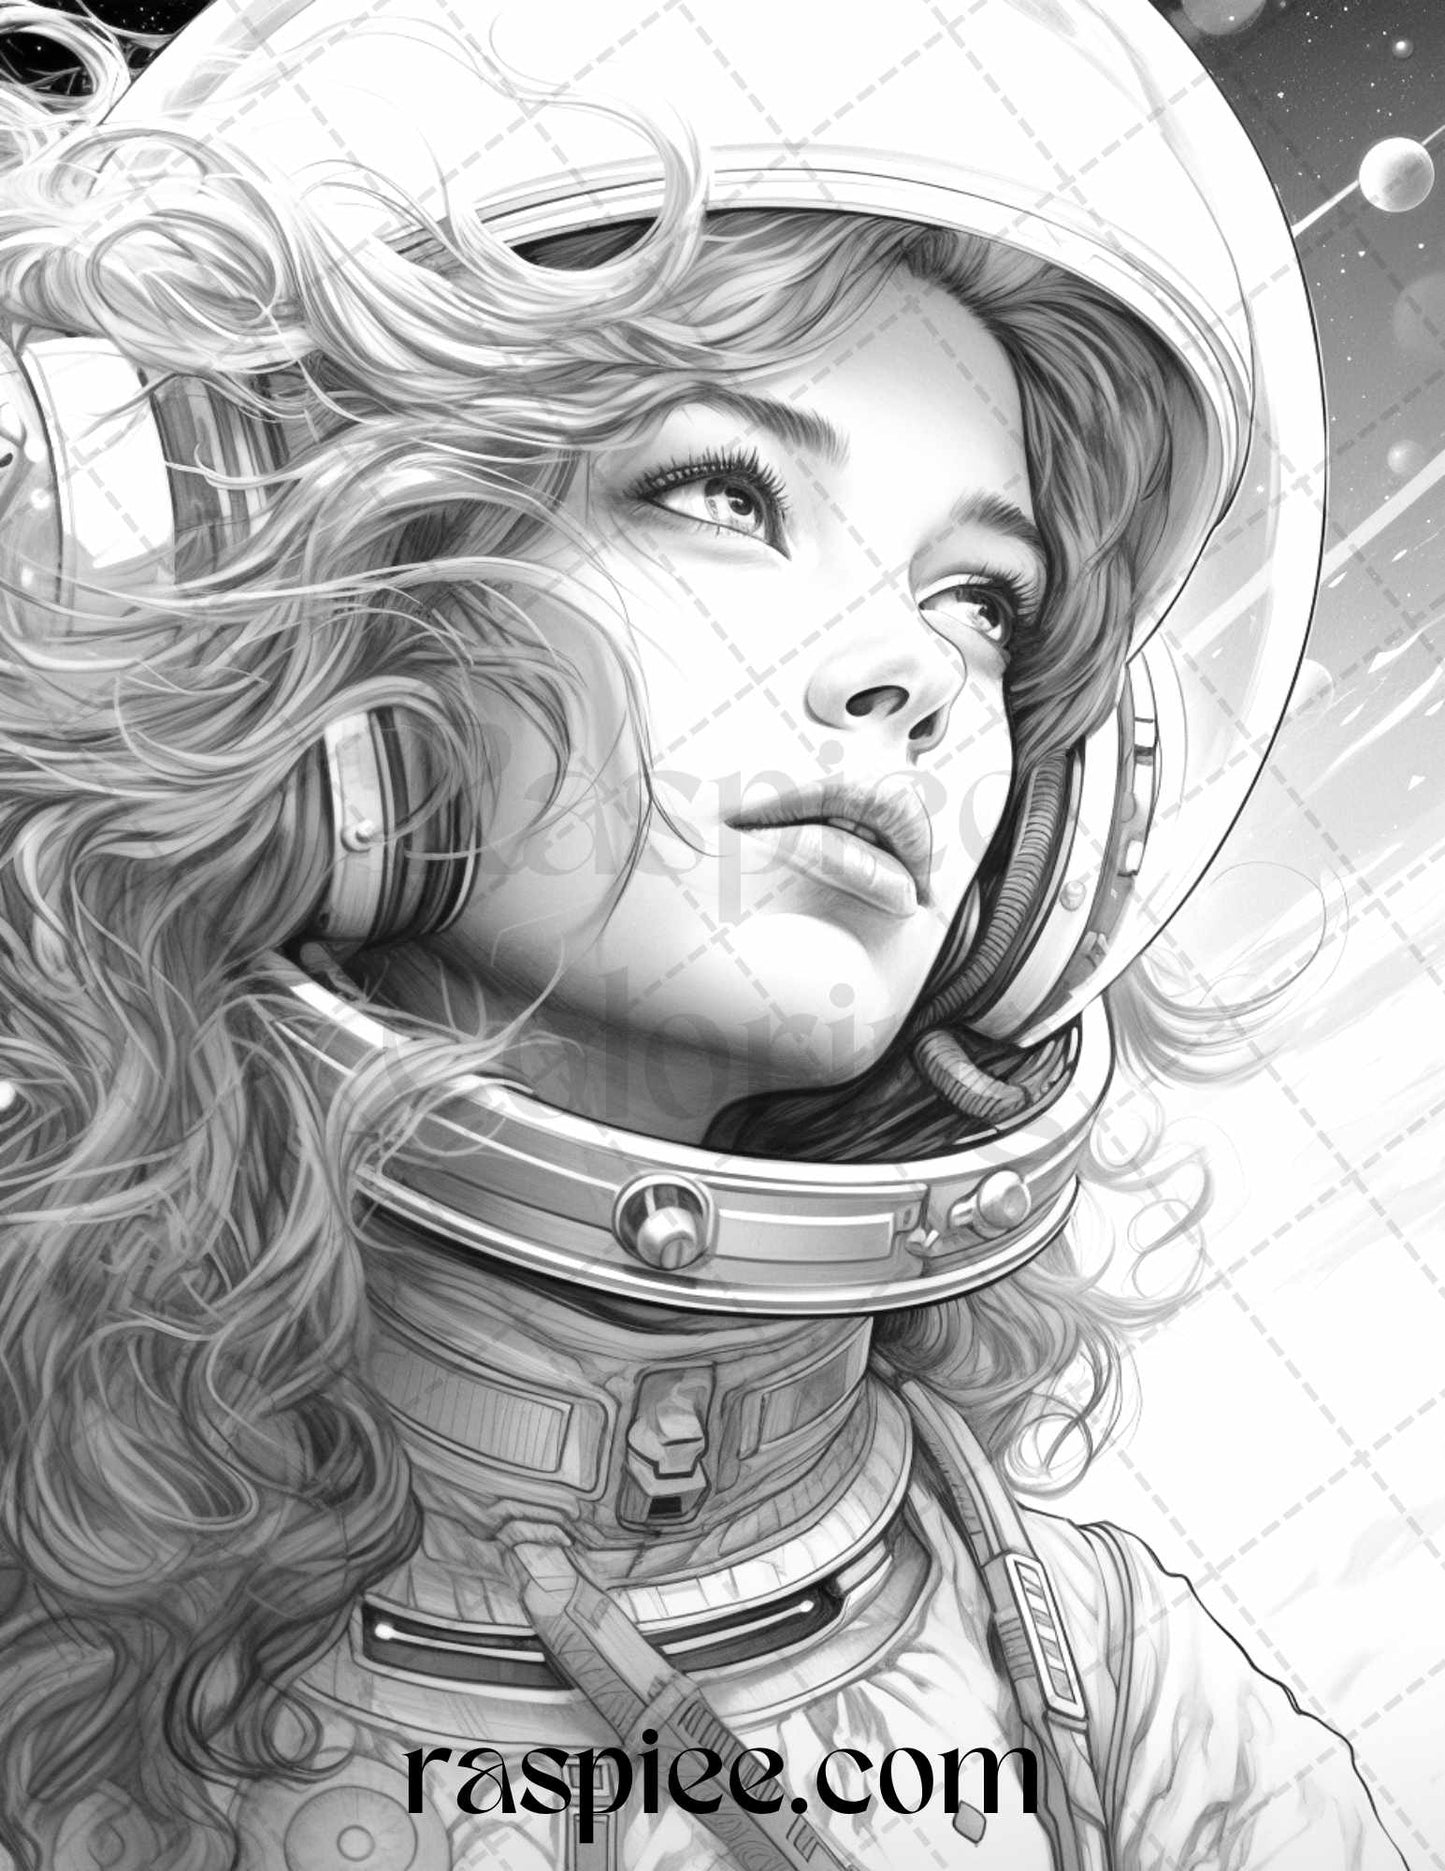 Astronaut girl coloring page, Adult stress-relief coloring sheet, Printable space coloring page, Detailed sci-fi coloring print, Relaxing celestial coloring page, Galaxy-inspired coloring sheet, Mindful coloring for adults